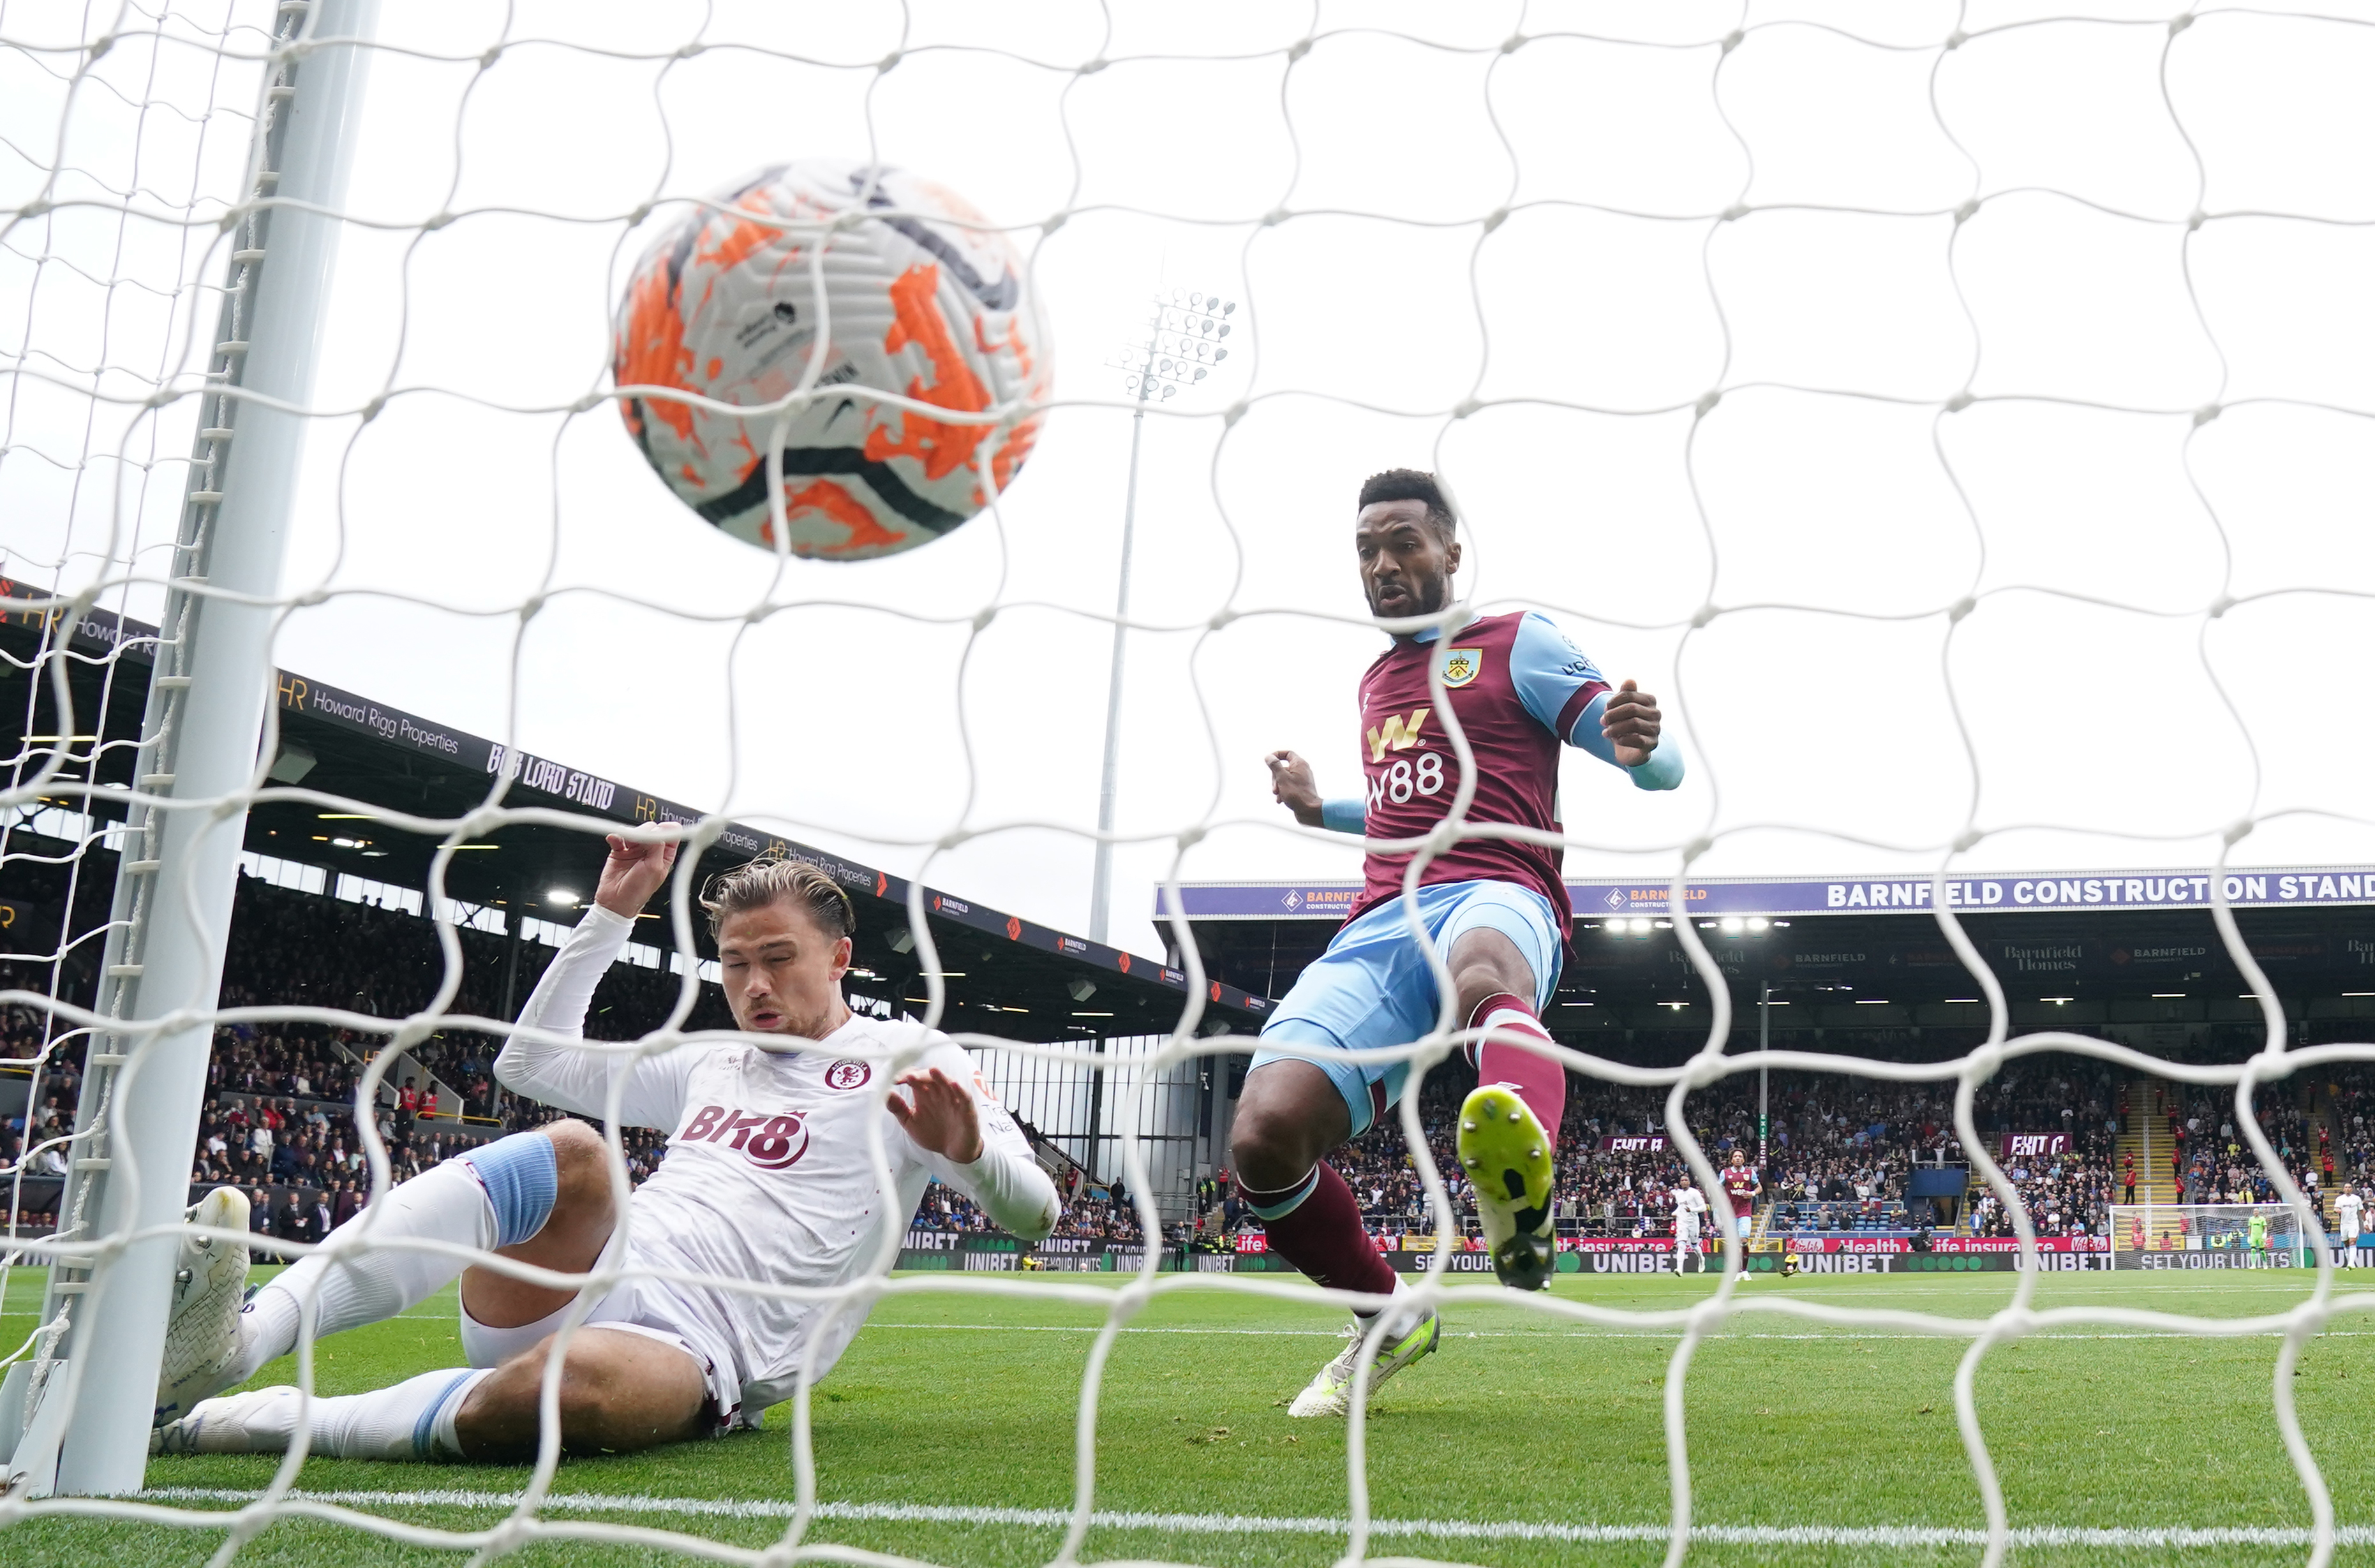 Cash slides in to open the scoring for Villa at Turf Moor